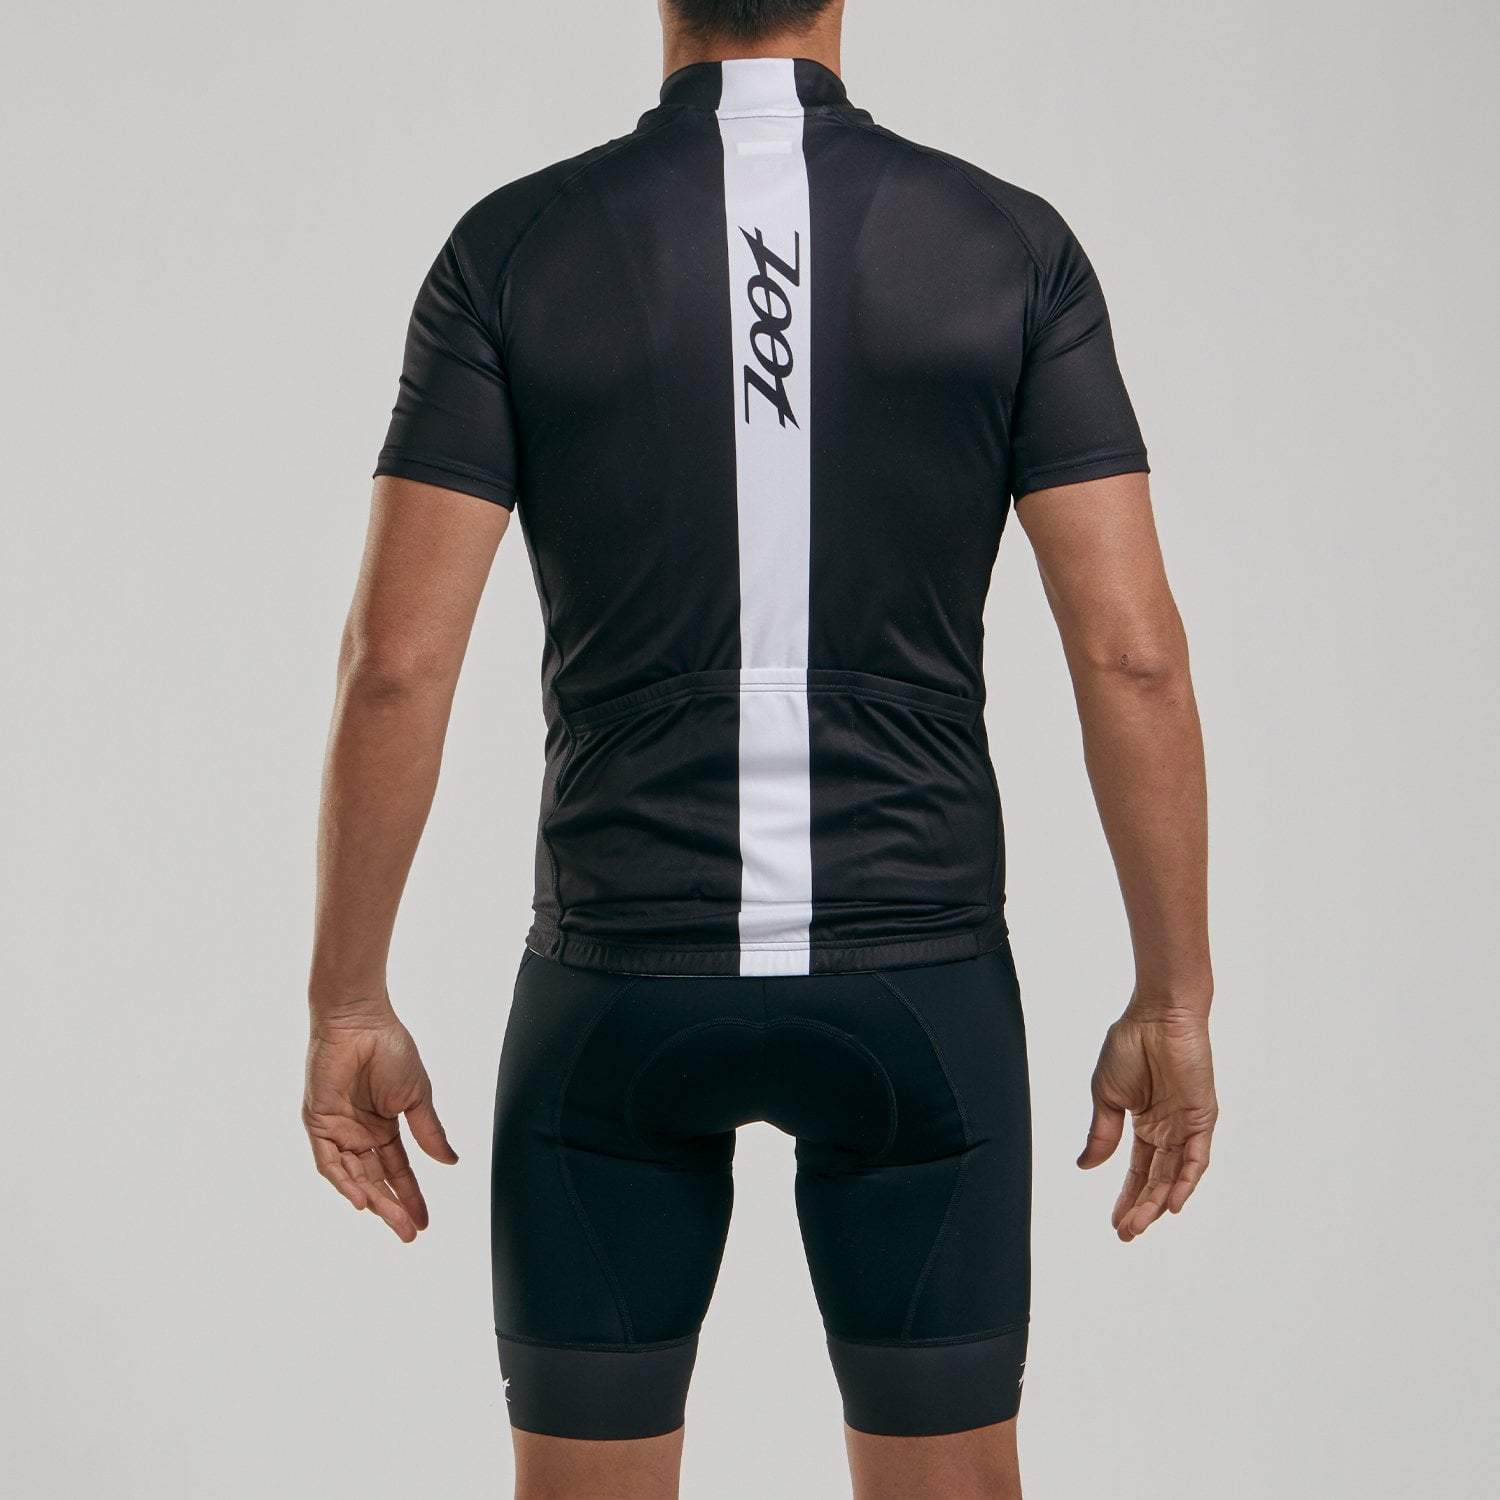 ZOOT Core + Maillot Ciclismo Hombre - safety yellow